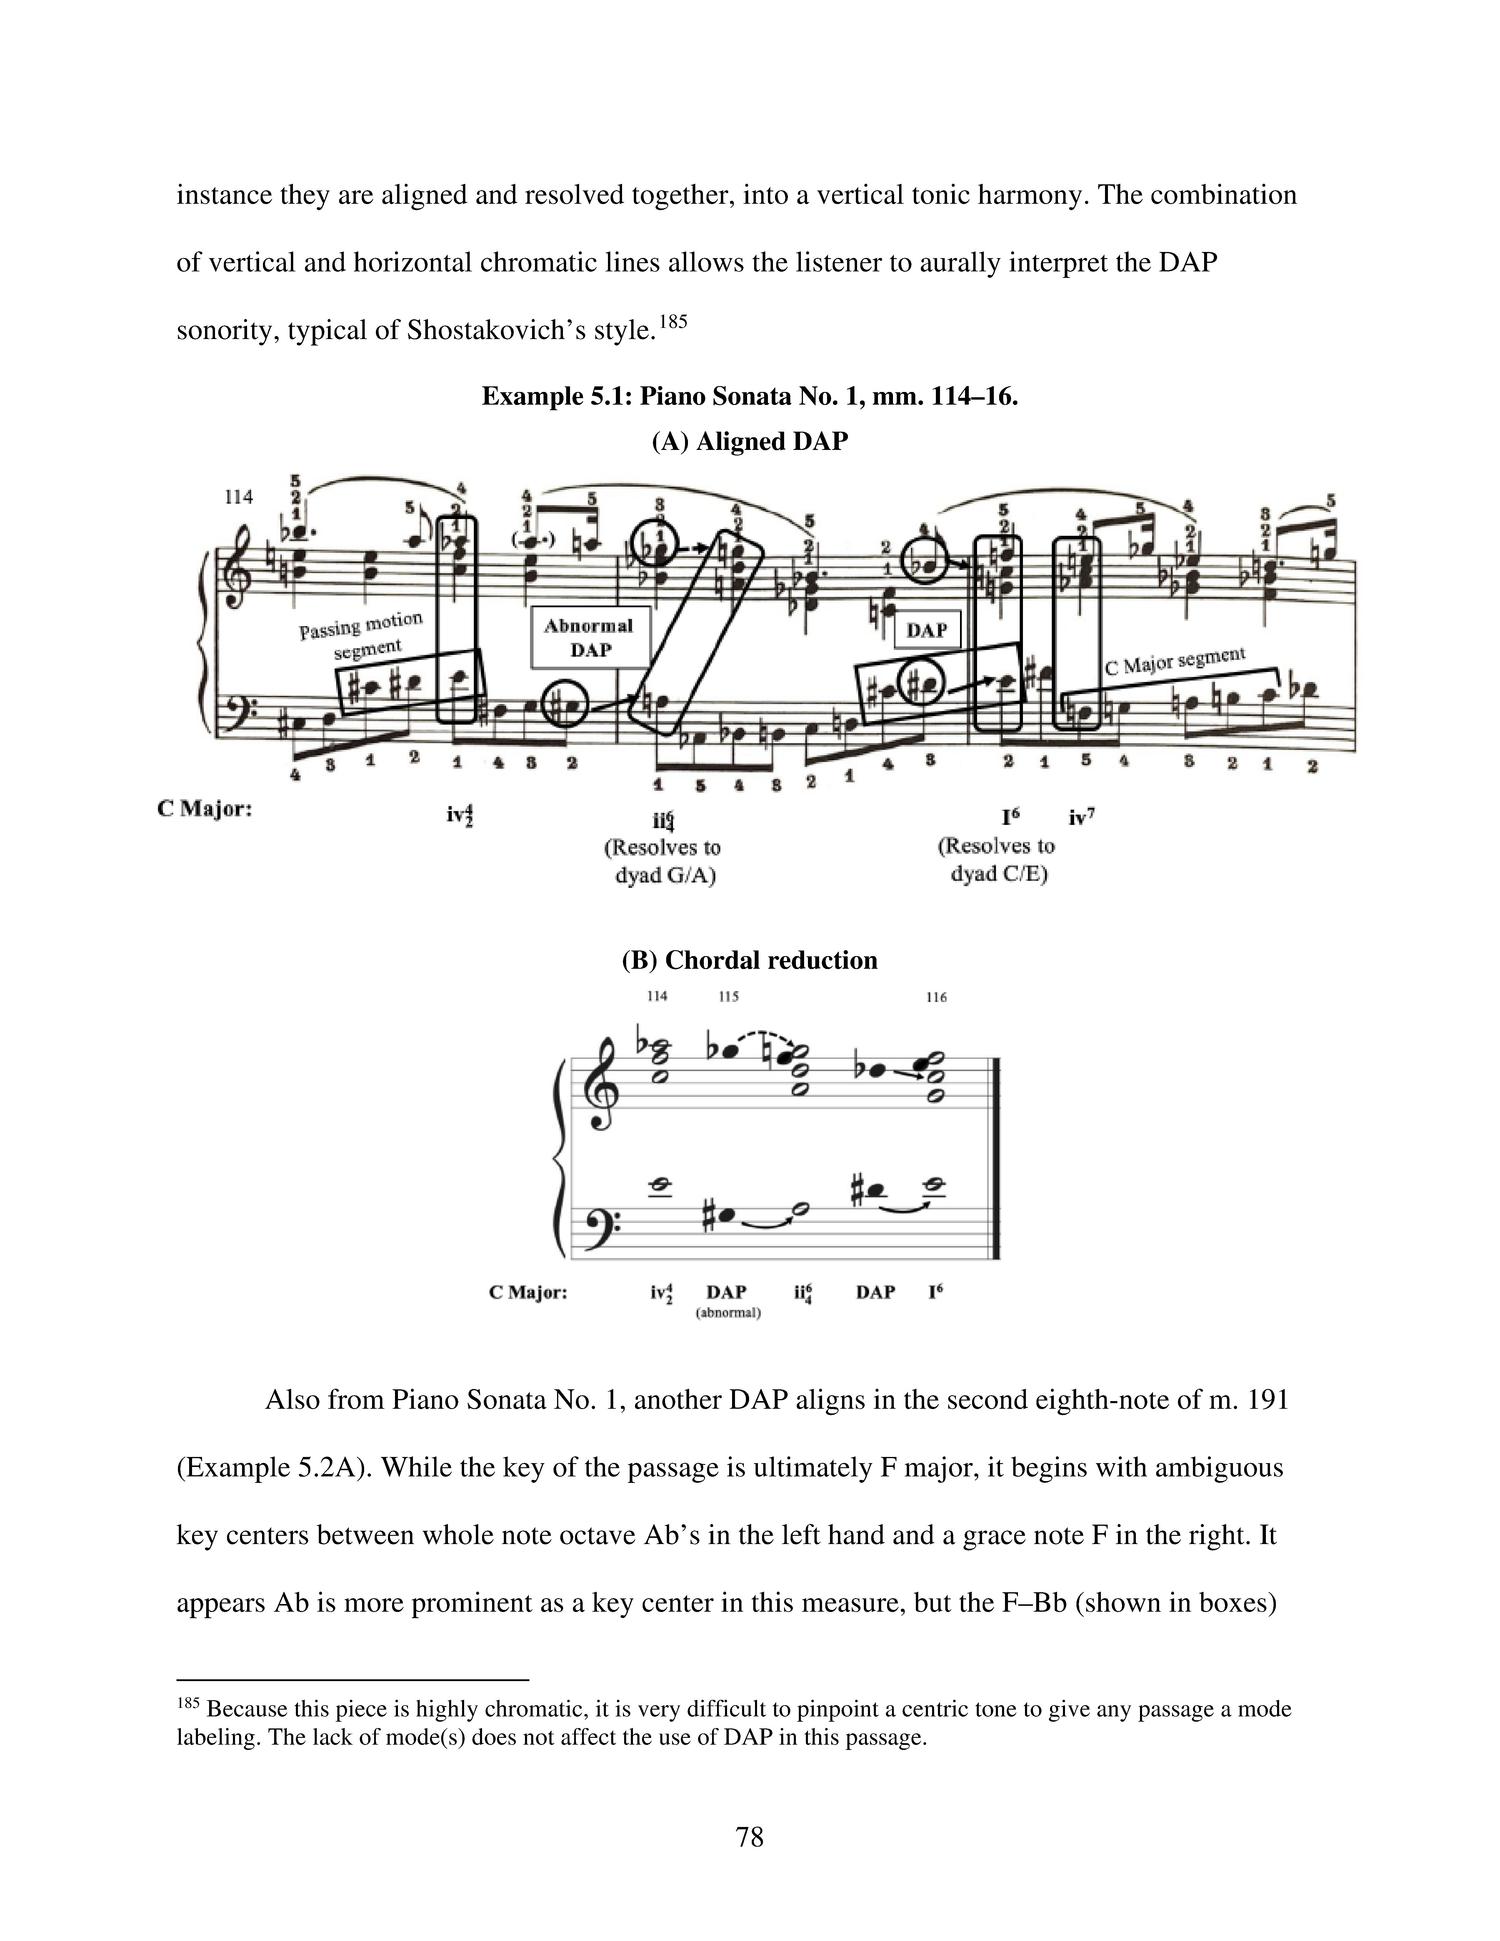 Developing Ogolevets's Doubly Augmented Prime: Semitonal Voice Leading in the Music of Shostakovich
                                                
                                                    78
                                                